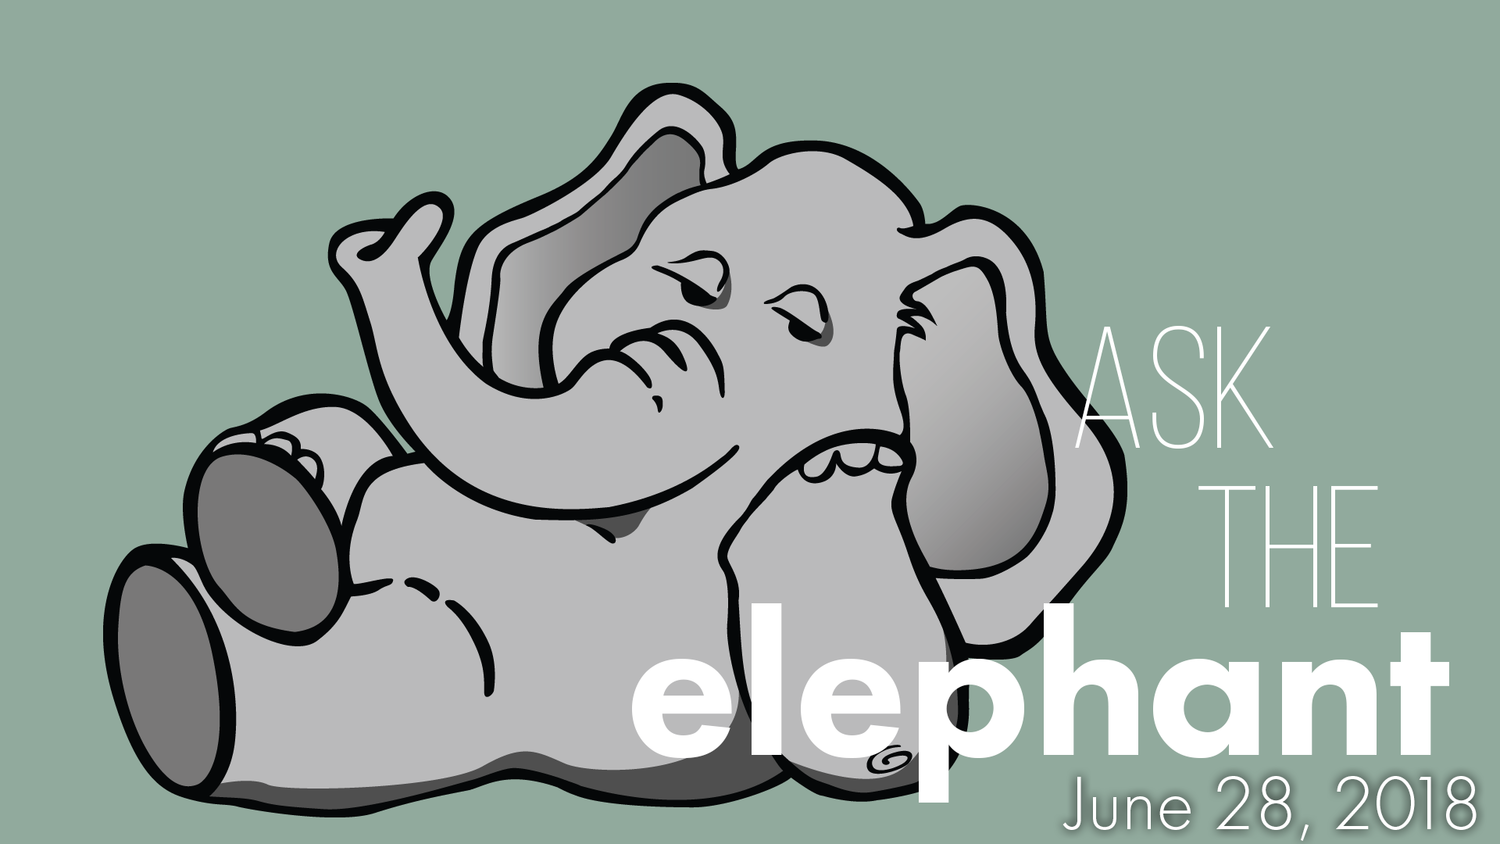 Ask the Elephant - June 28, 2018